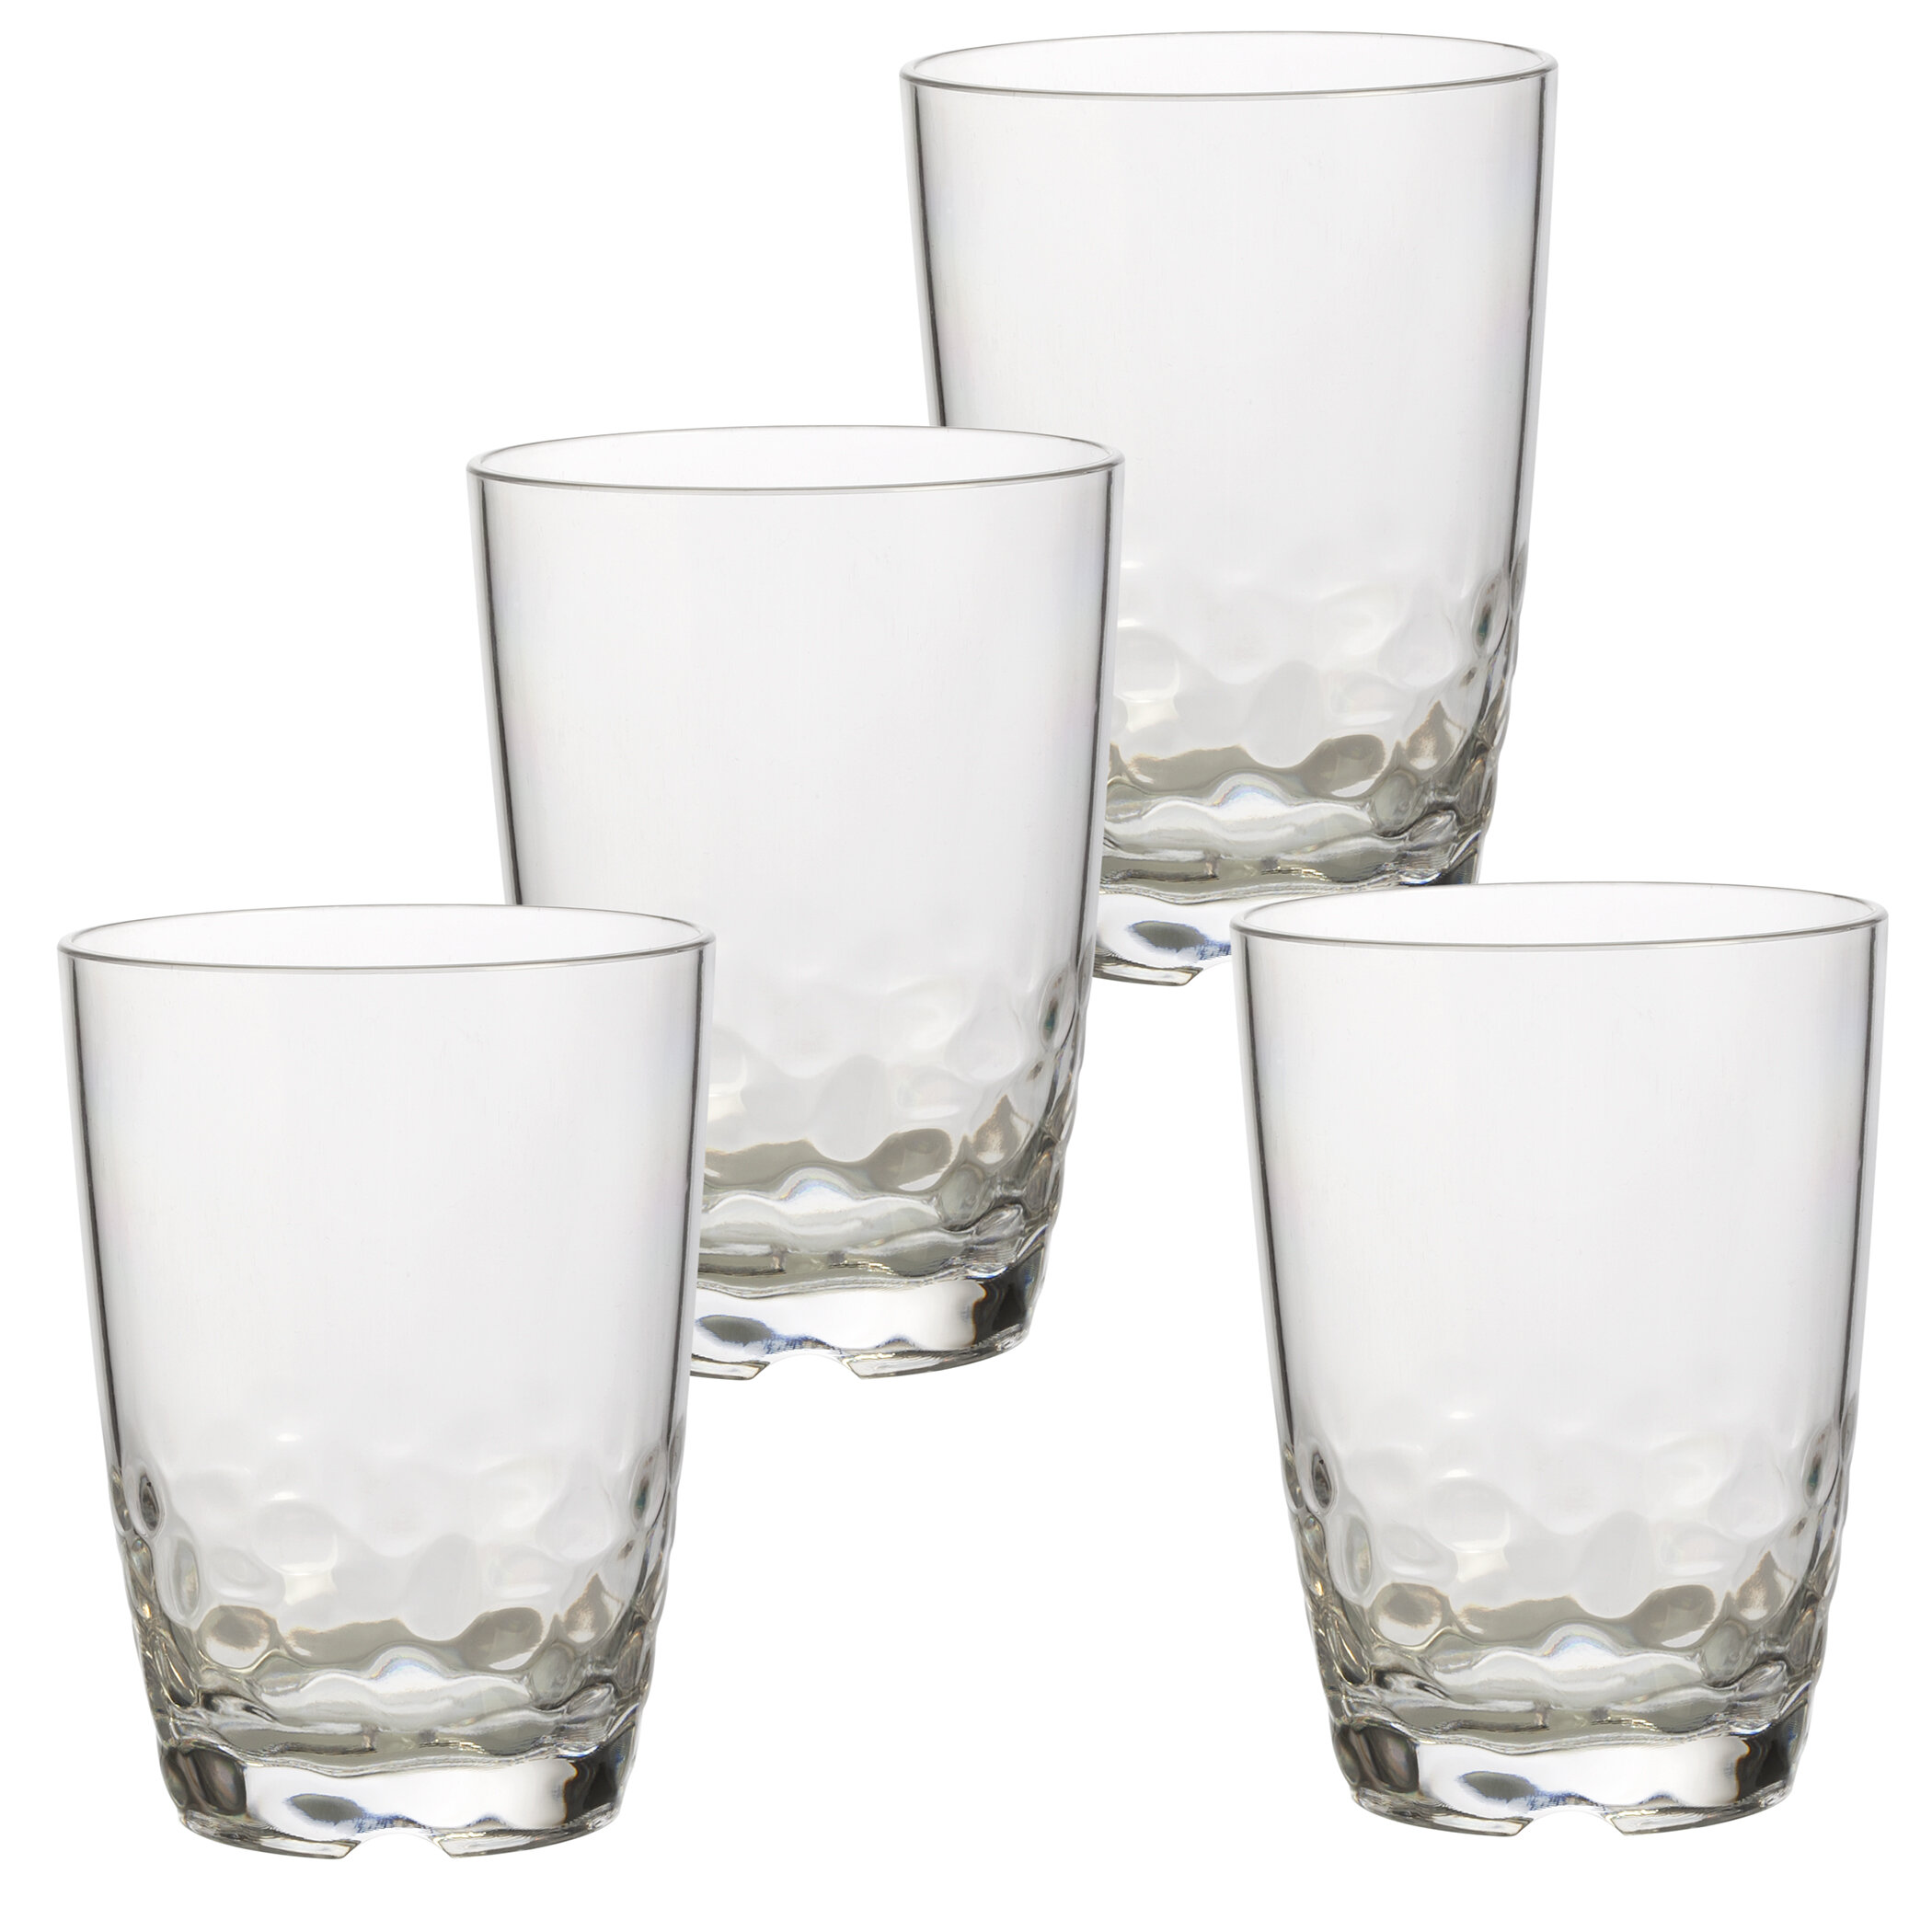 12 oz Acrylic Unbreakable Drinking Glasses Dishwasher Safe Bathroom Cups Stackable Juice Glasses Beverage Cup Clear 8 Pack Topsky Plastic Water Tumblers